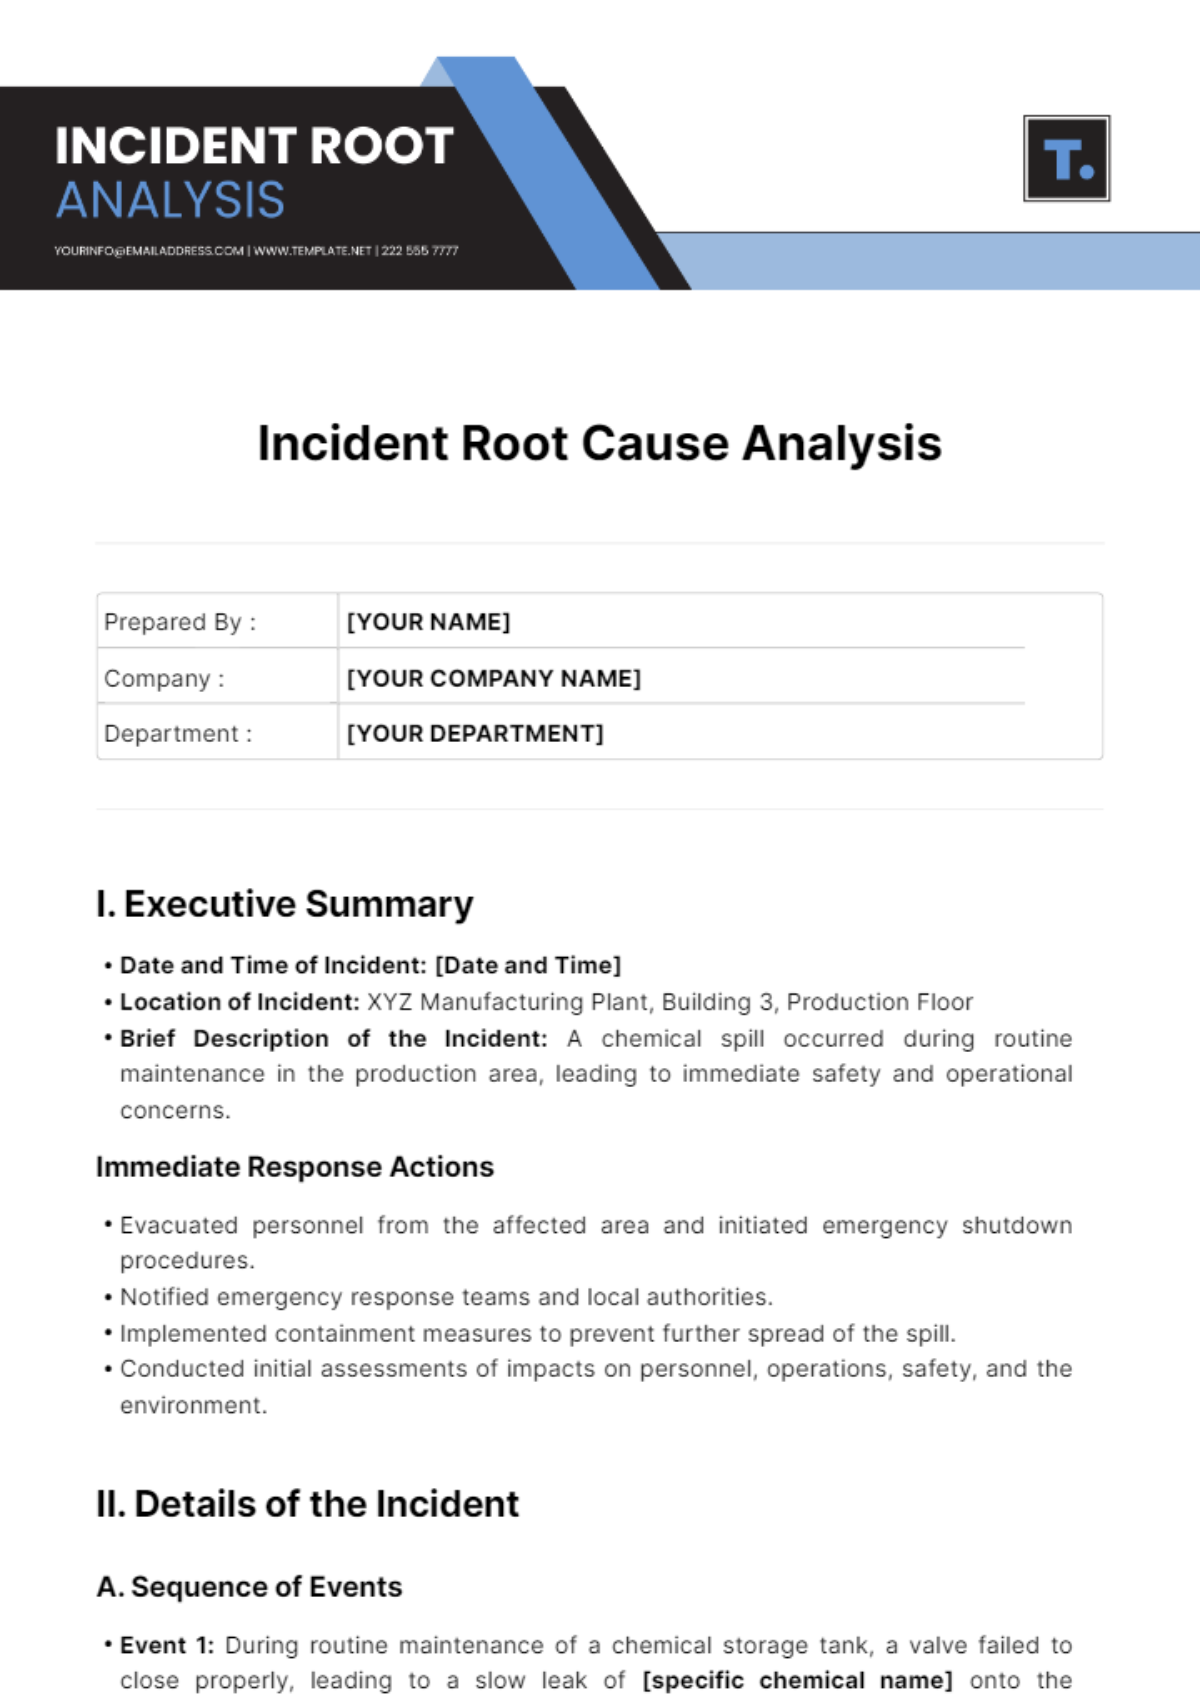 Incident Root Cause Analysis Template